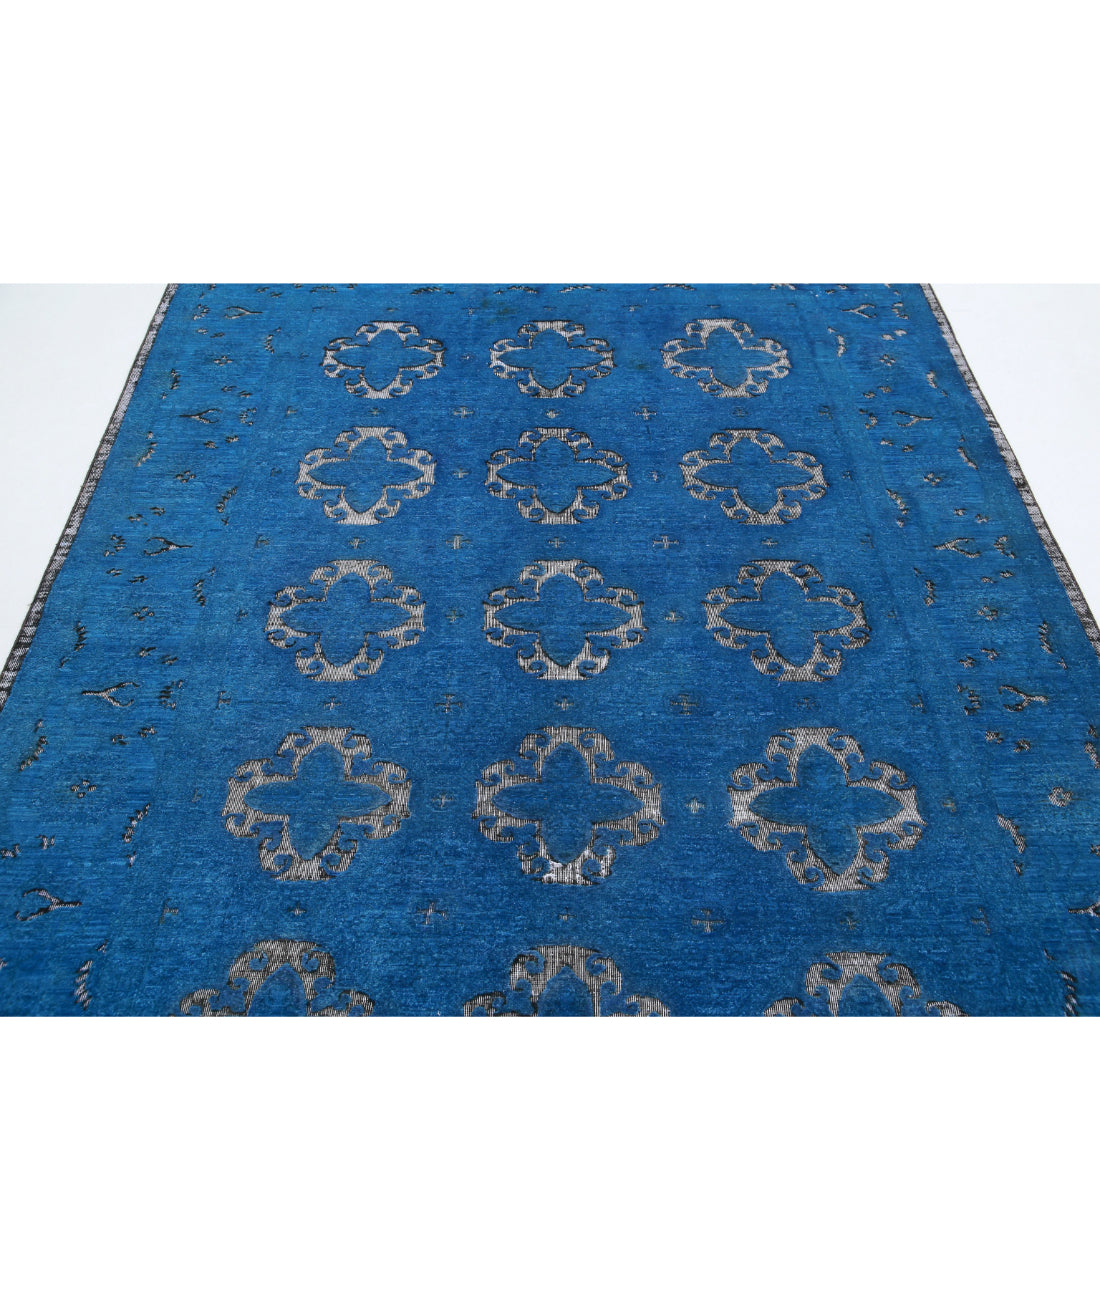 Hand Knotted Onyx Wool Rug - 6'5'' x 8'1'' 6'5'' x 8'1'' (193 X 243) / Blue / Blue